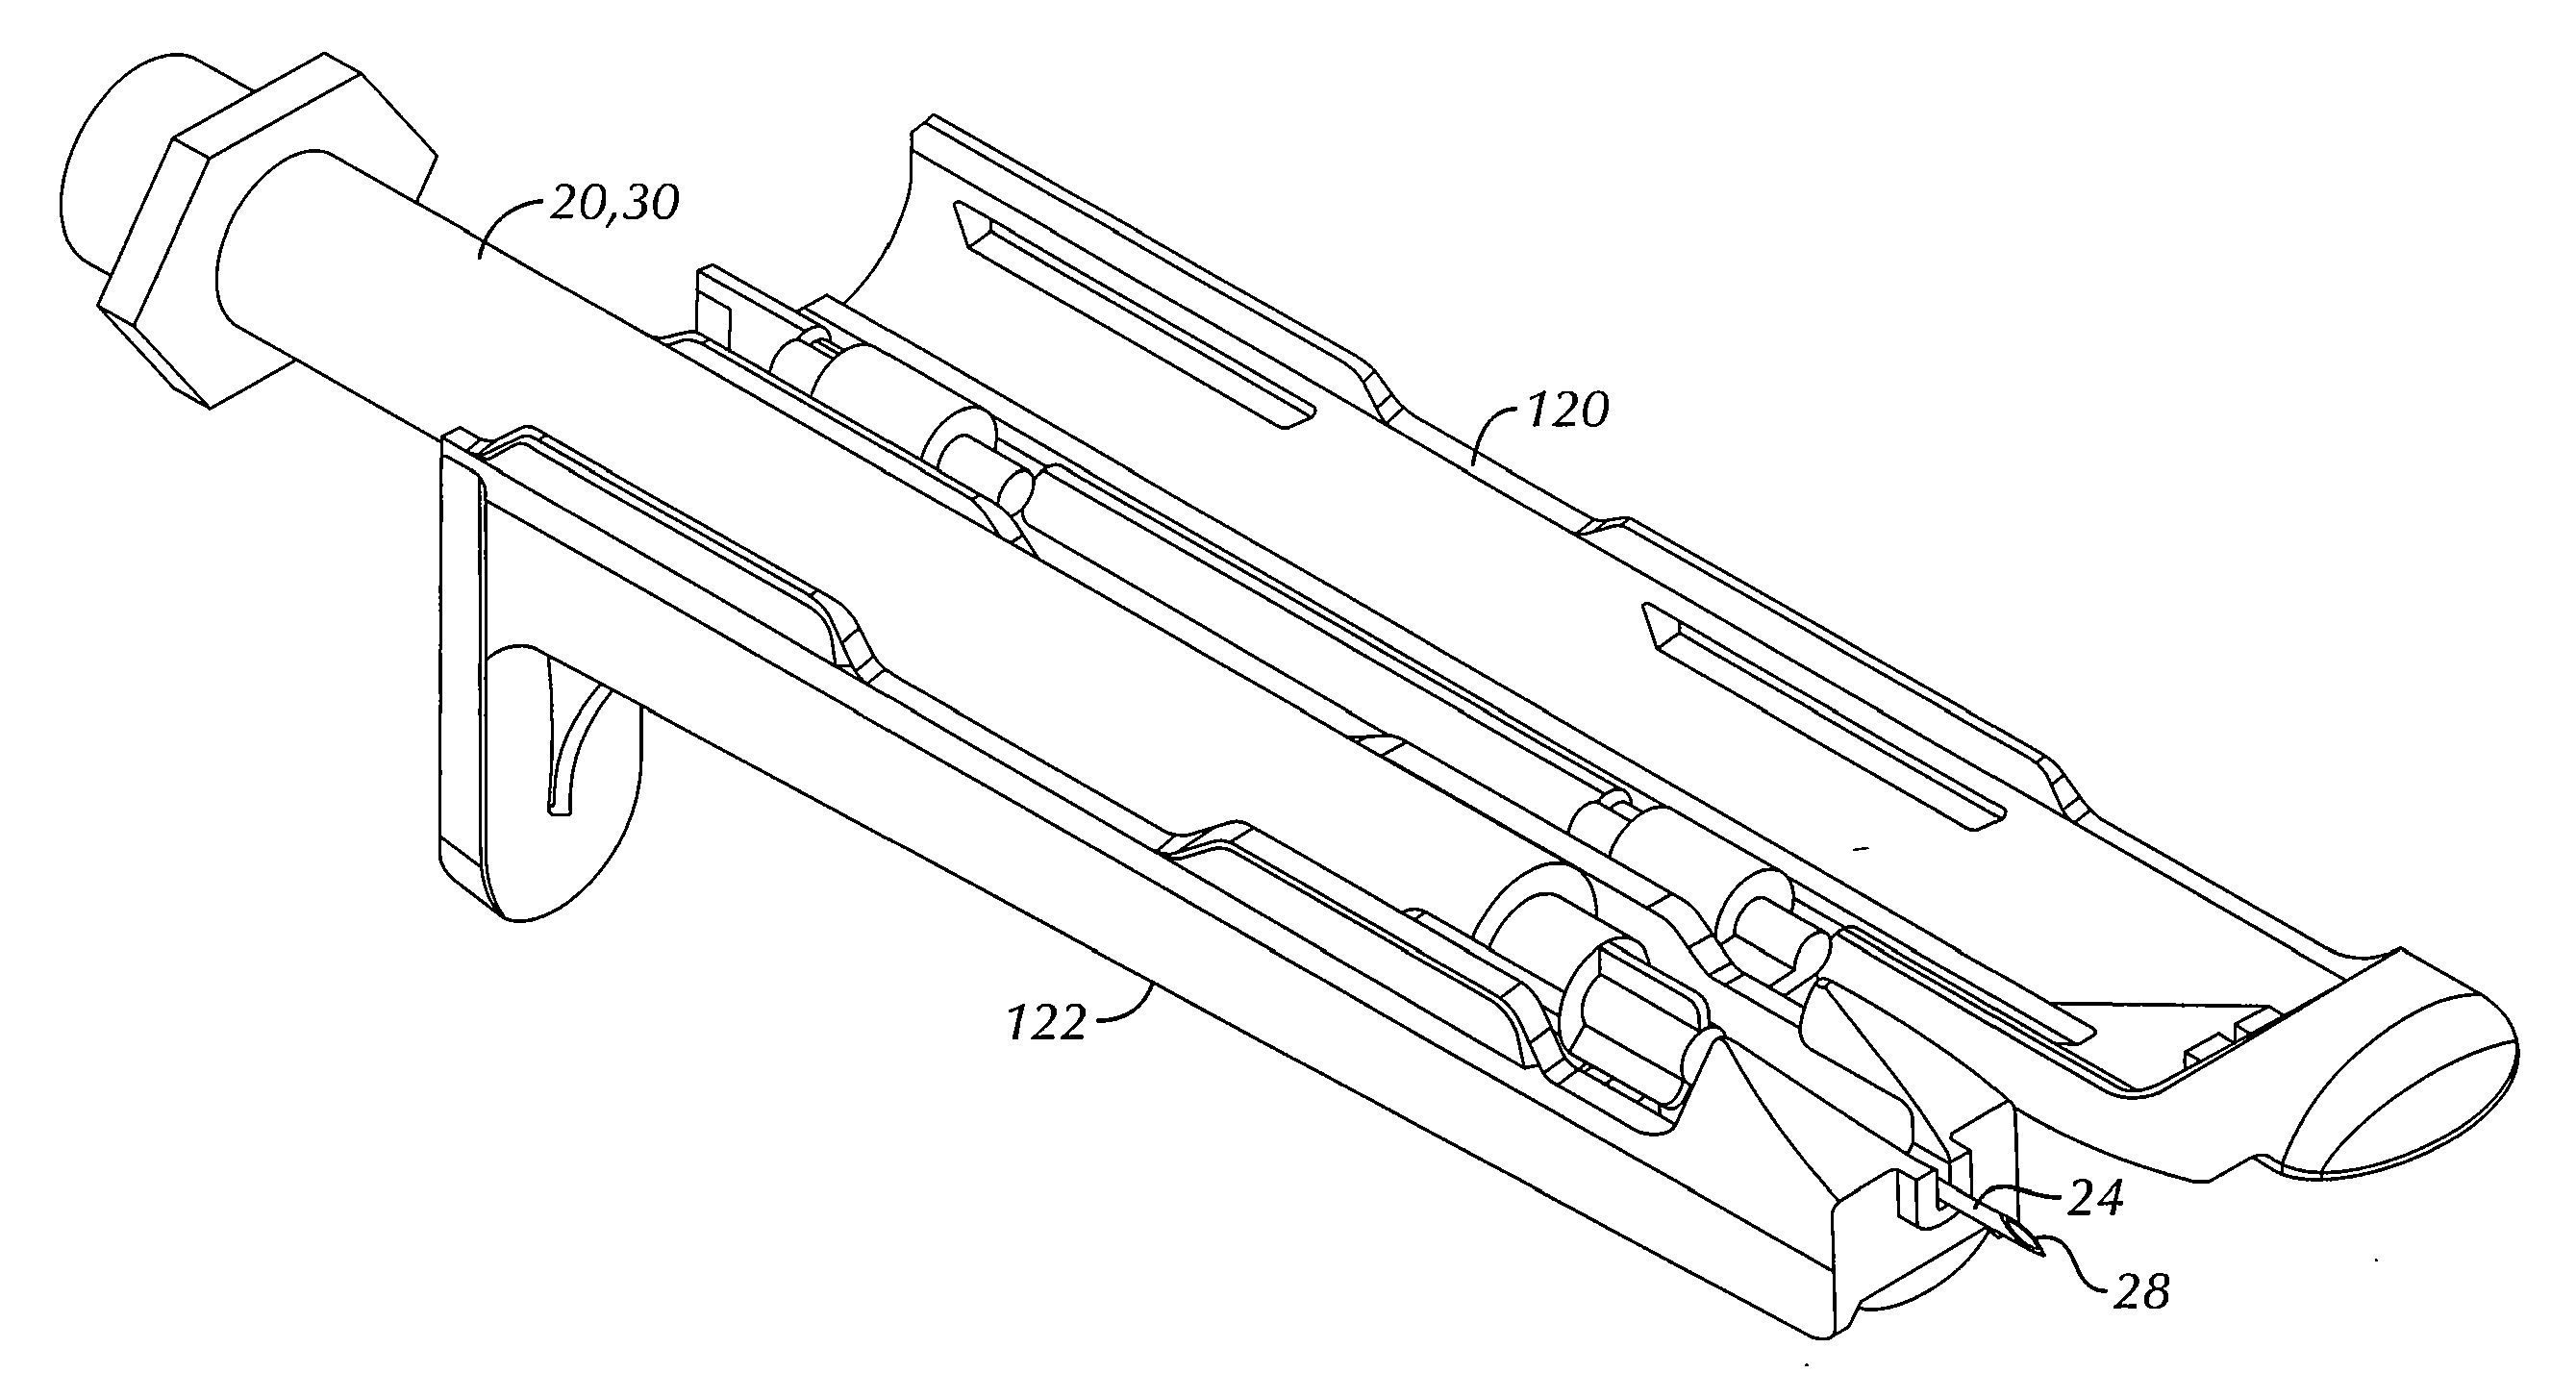 Alignment of a Needle in an Intradermal Injection Device